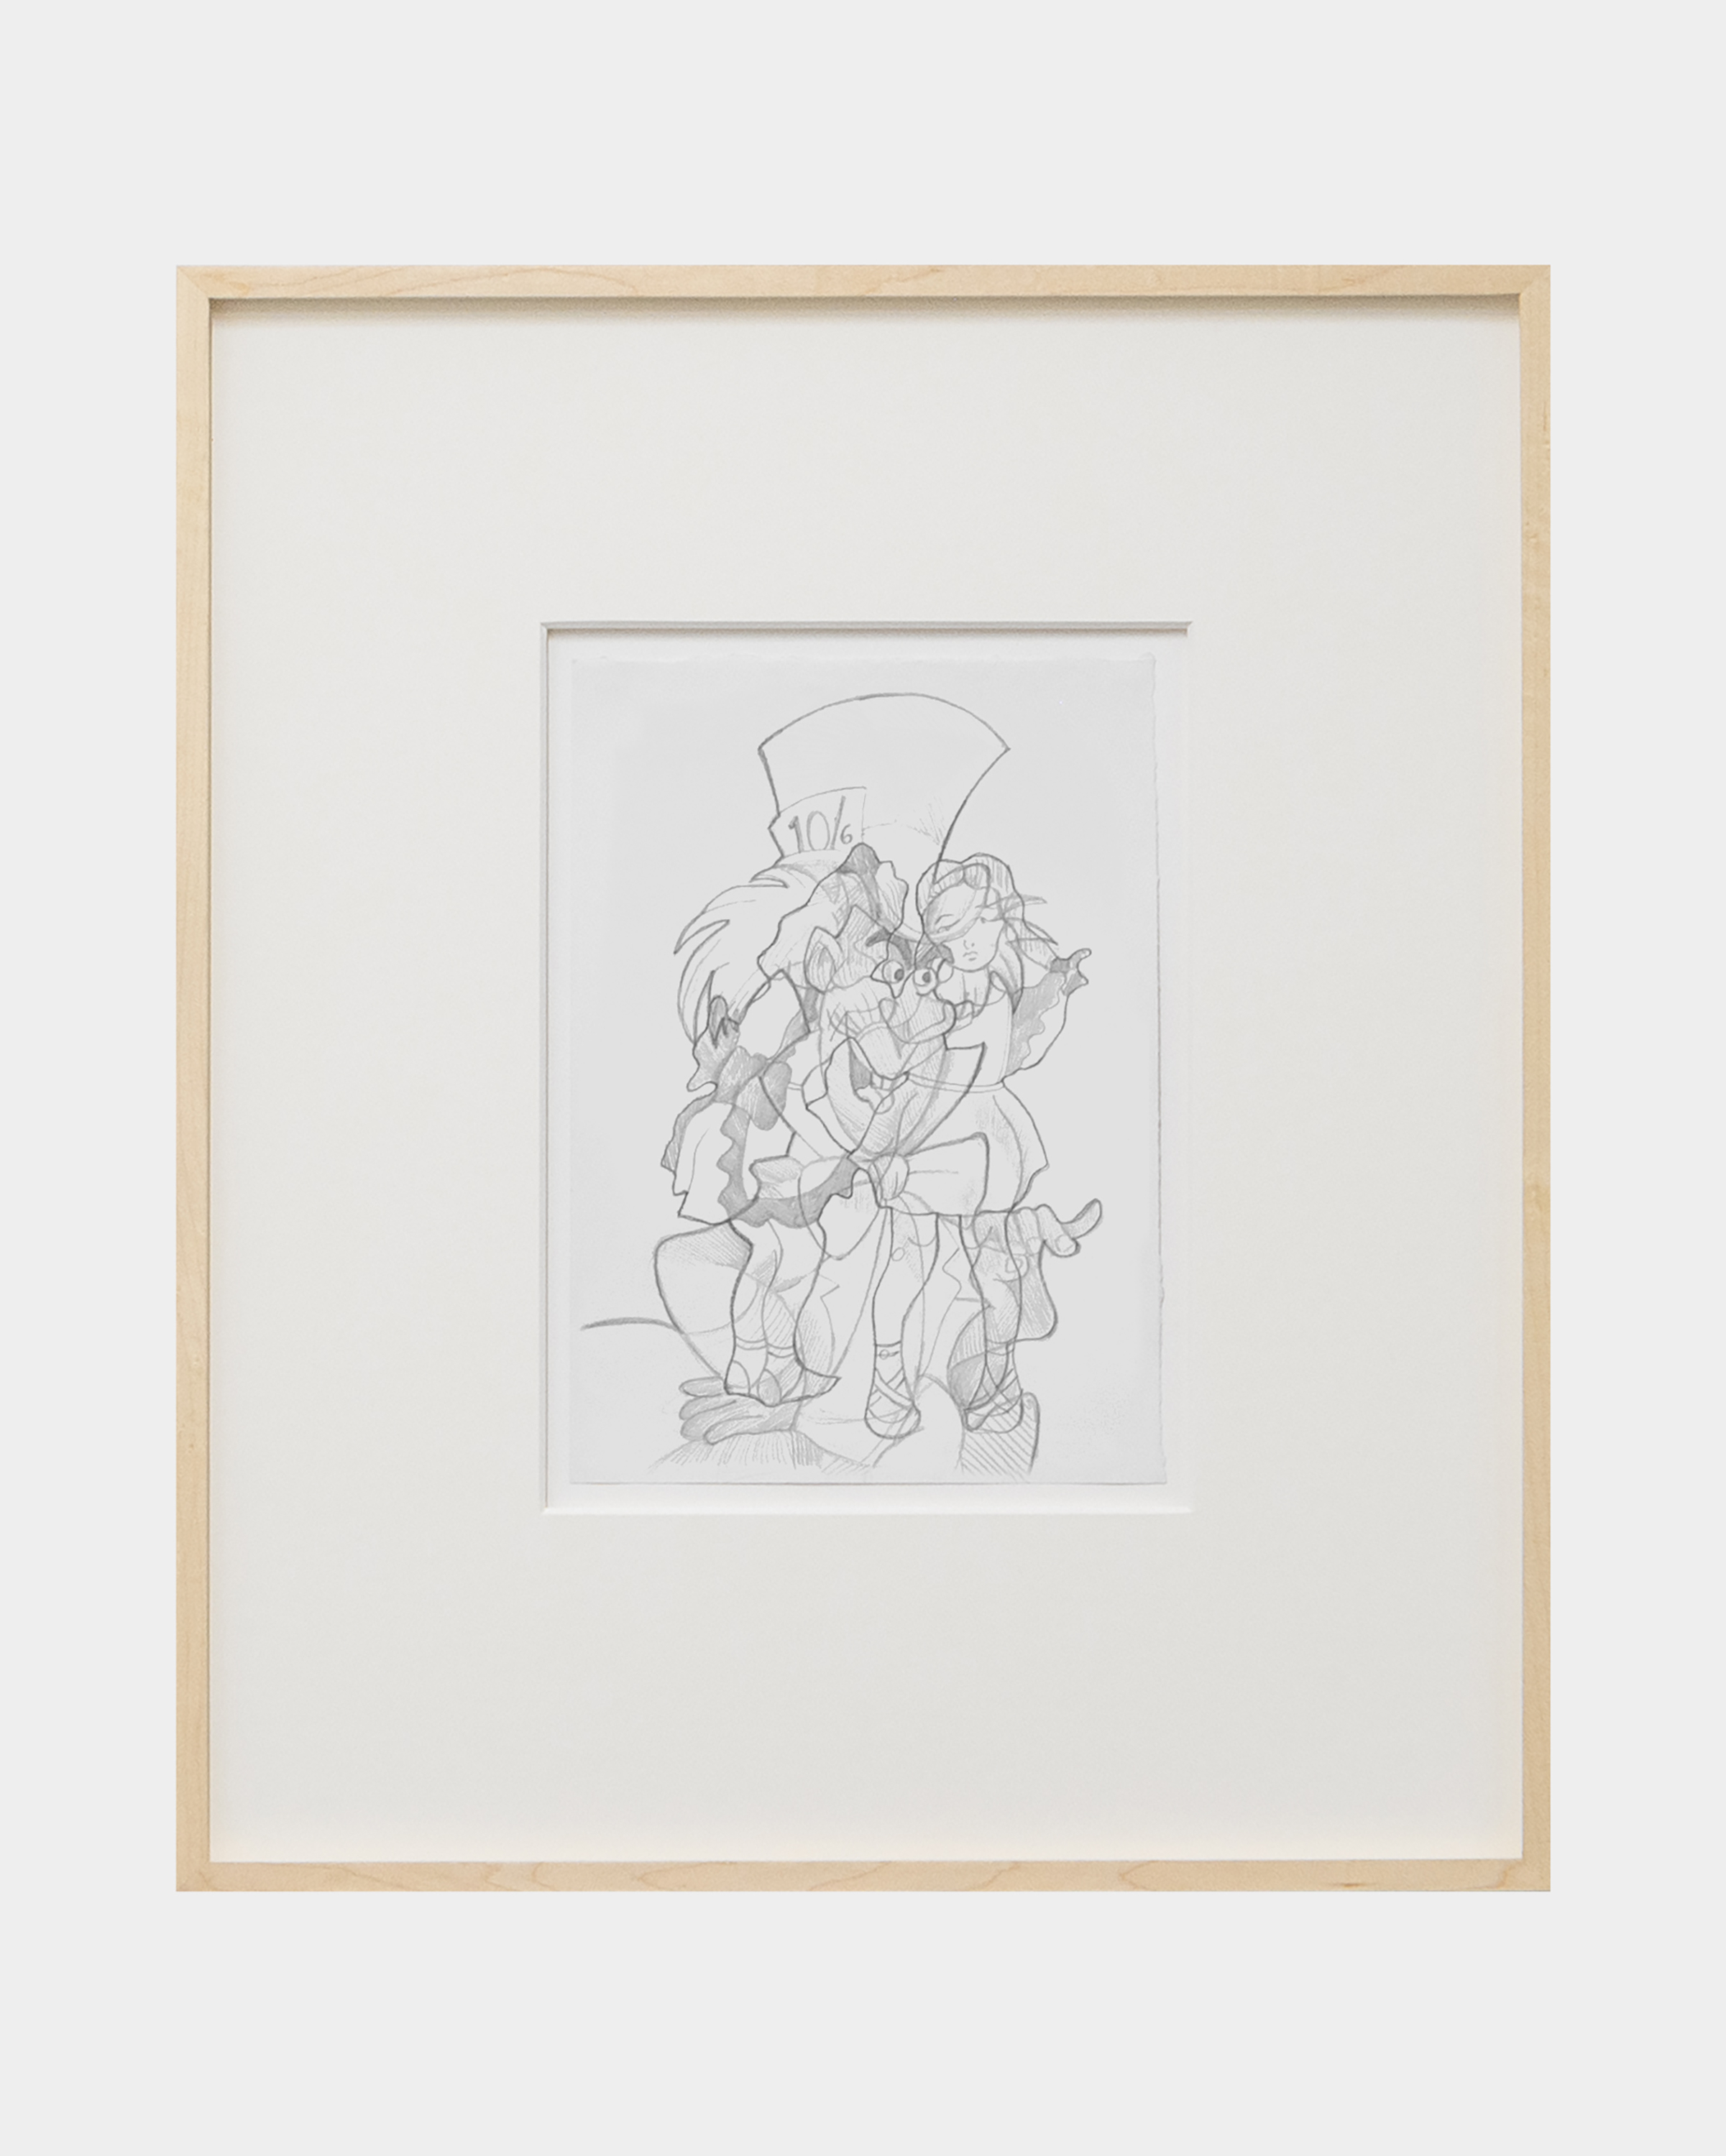 Daniel Moldoveanu, Untitled (Henry Darger, Wolfgang Reitherman, Ward Walrath Kimball), 2024, Pencil on paper in artist’s frame, 49,2 x 58, 2 x 3,2 cm